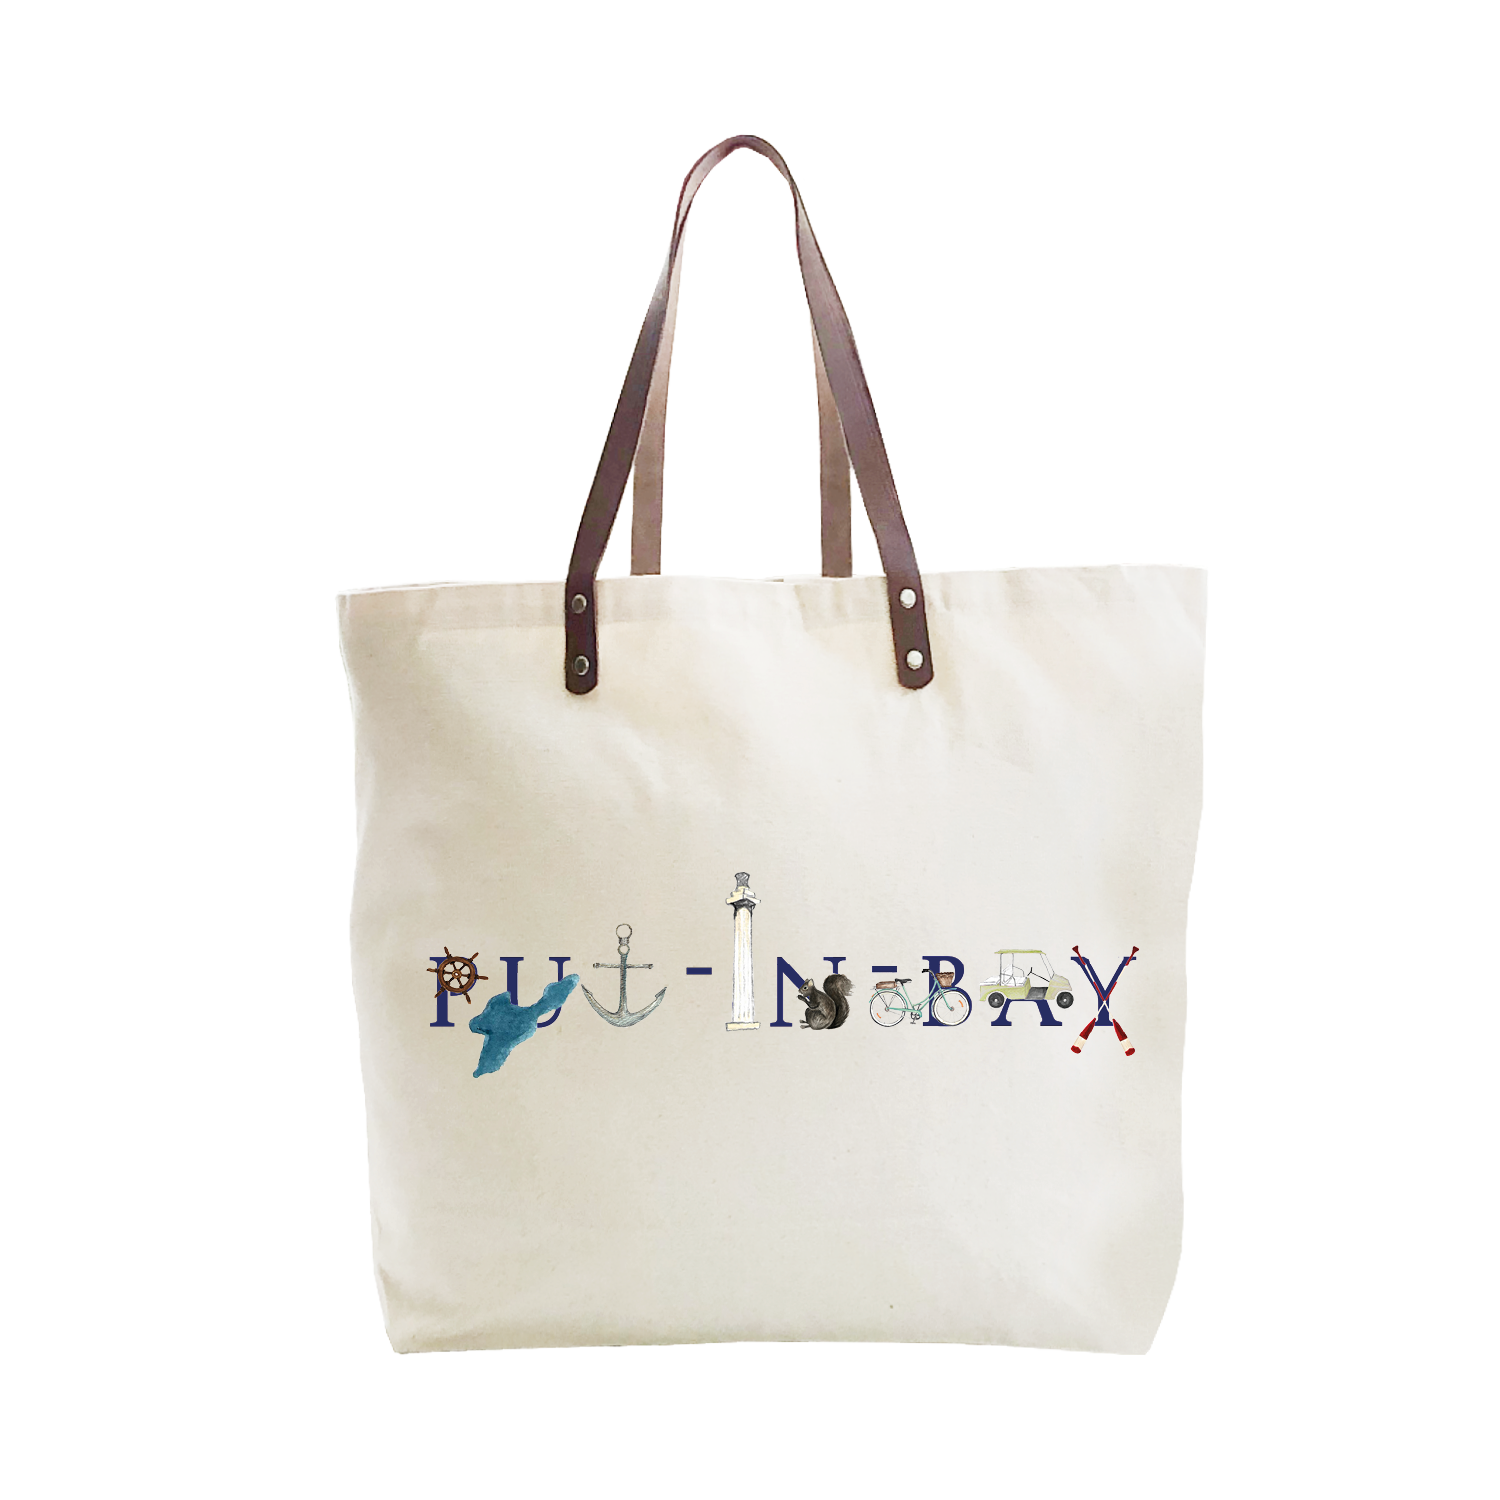 put-in-bay large tote